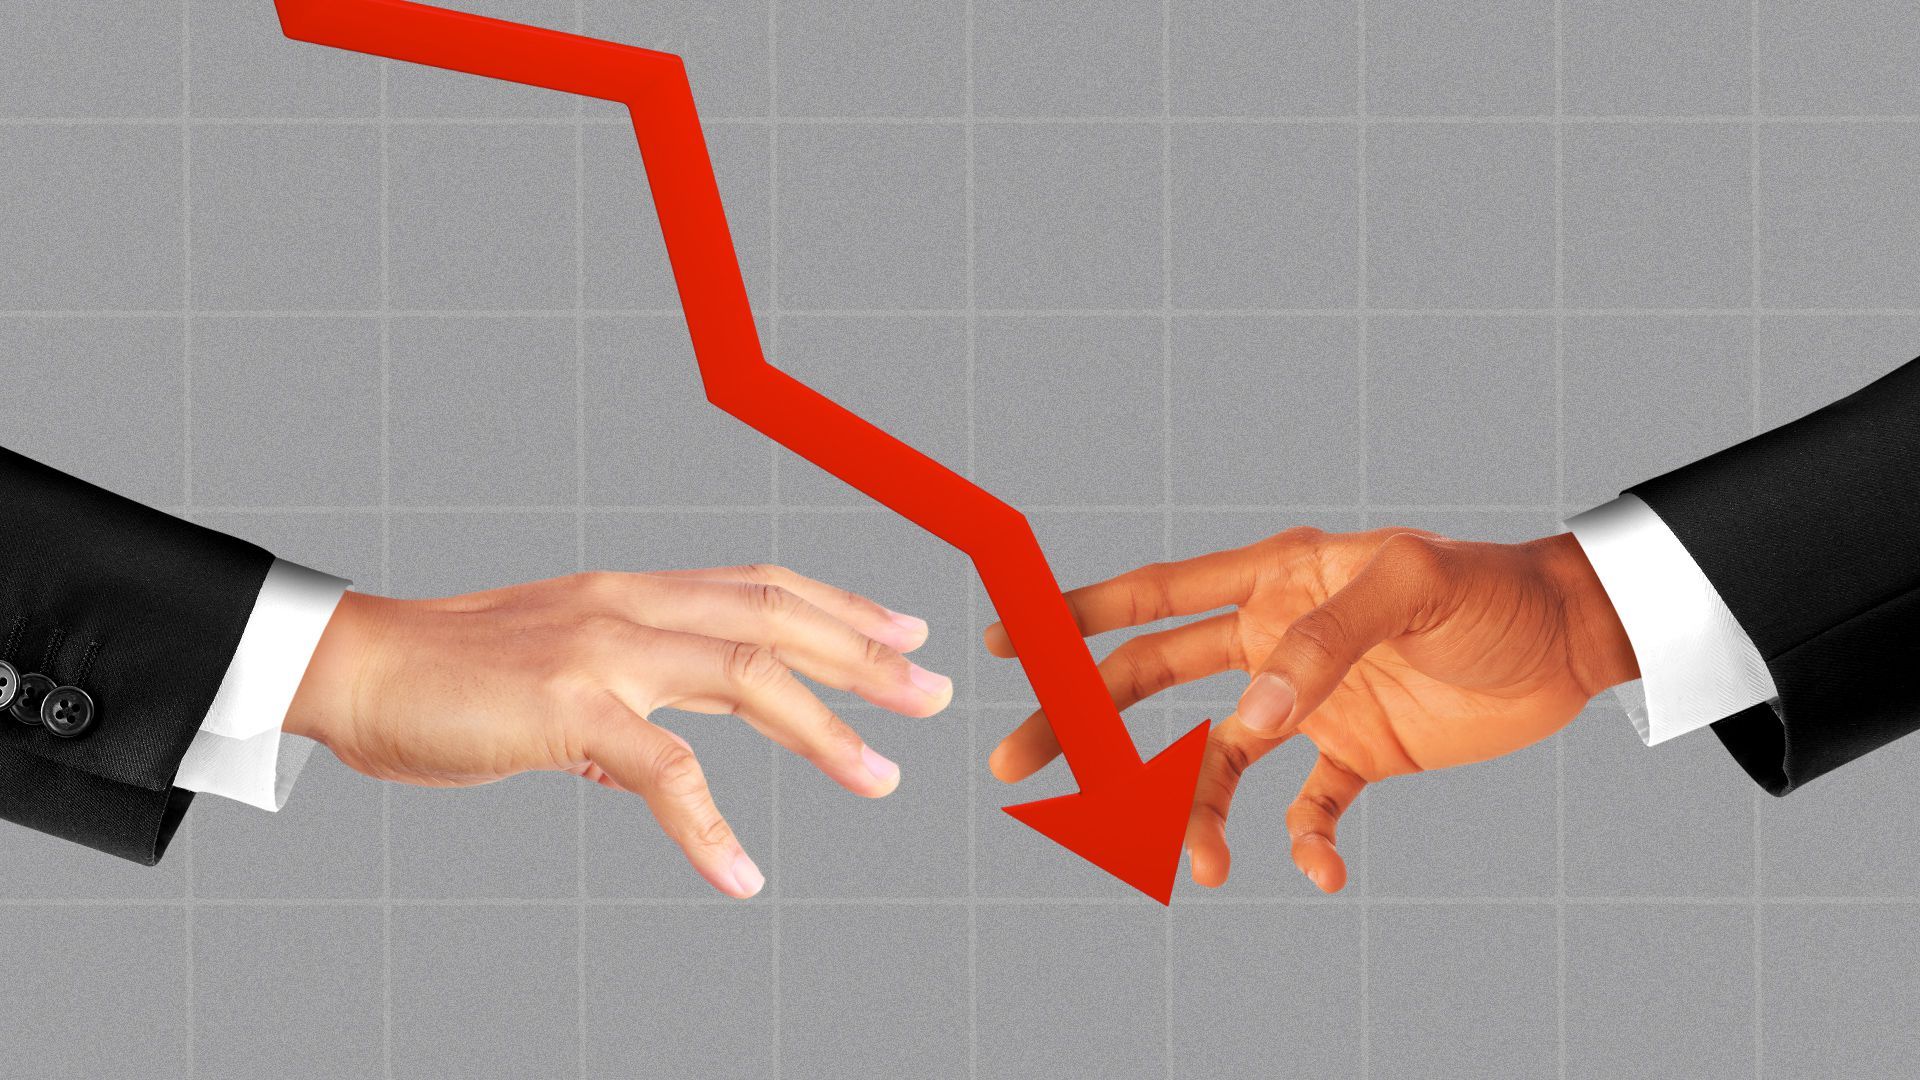 Illustration of two hands about to shake, but being kept apart by a downward trending arrow. 